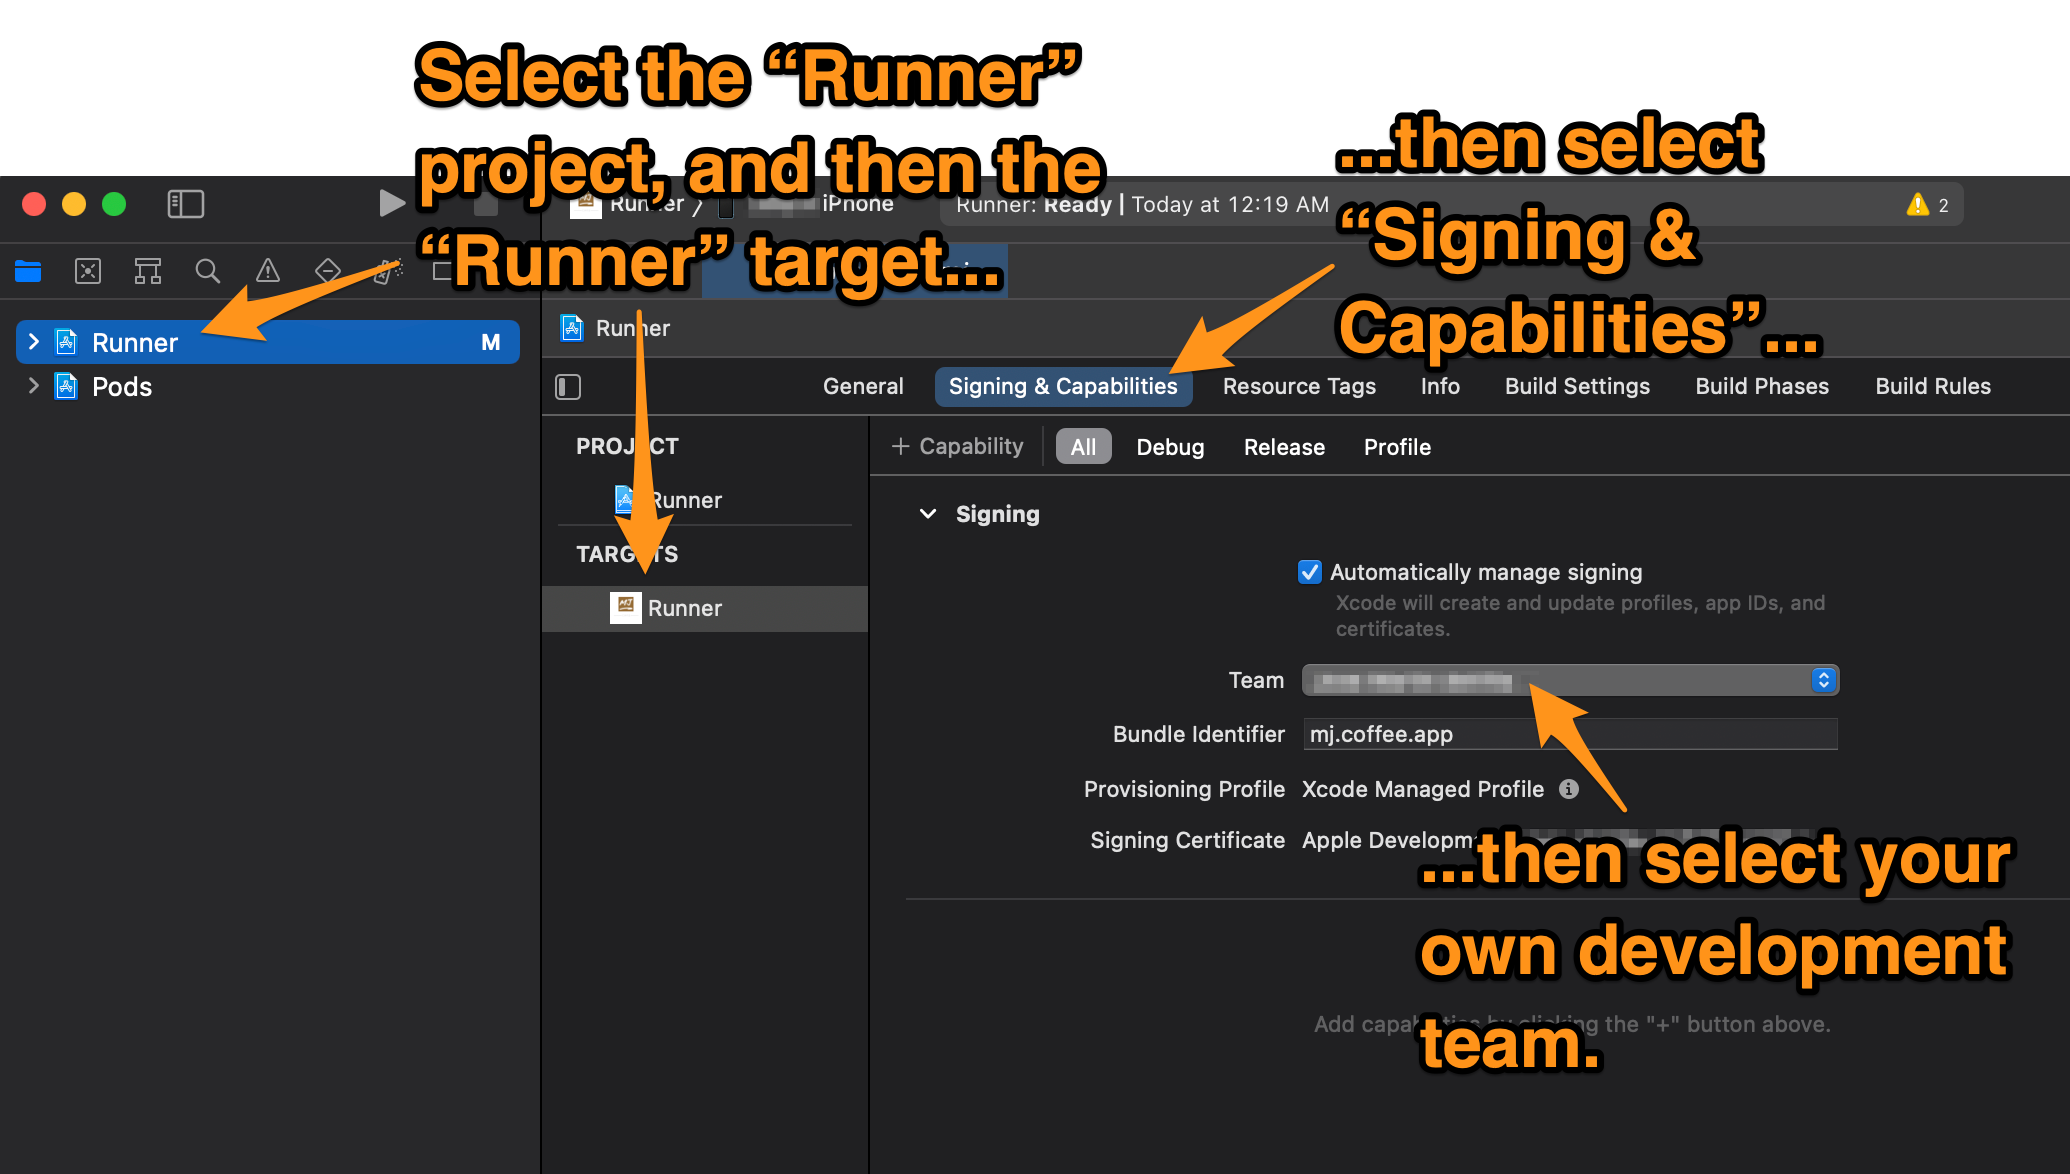 Screenshot of Xcode. The reader is instructed to select the “Runner” project and then the “Runner” target, then select “Signing and Capabilities”, and finally select their development team.